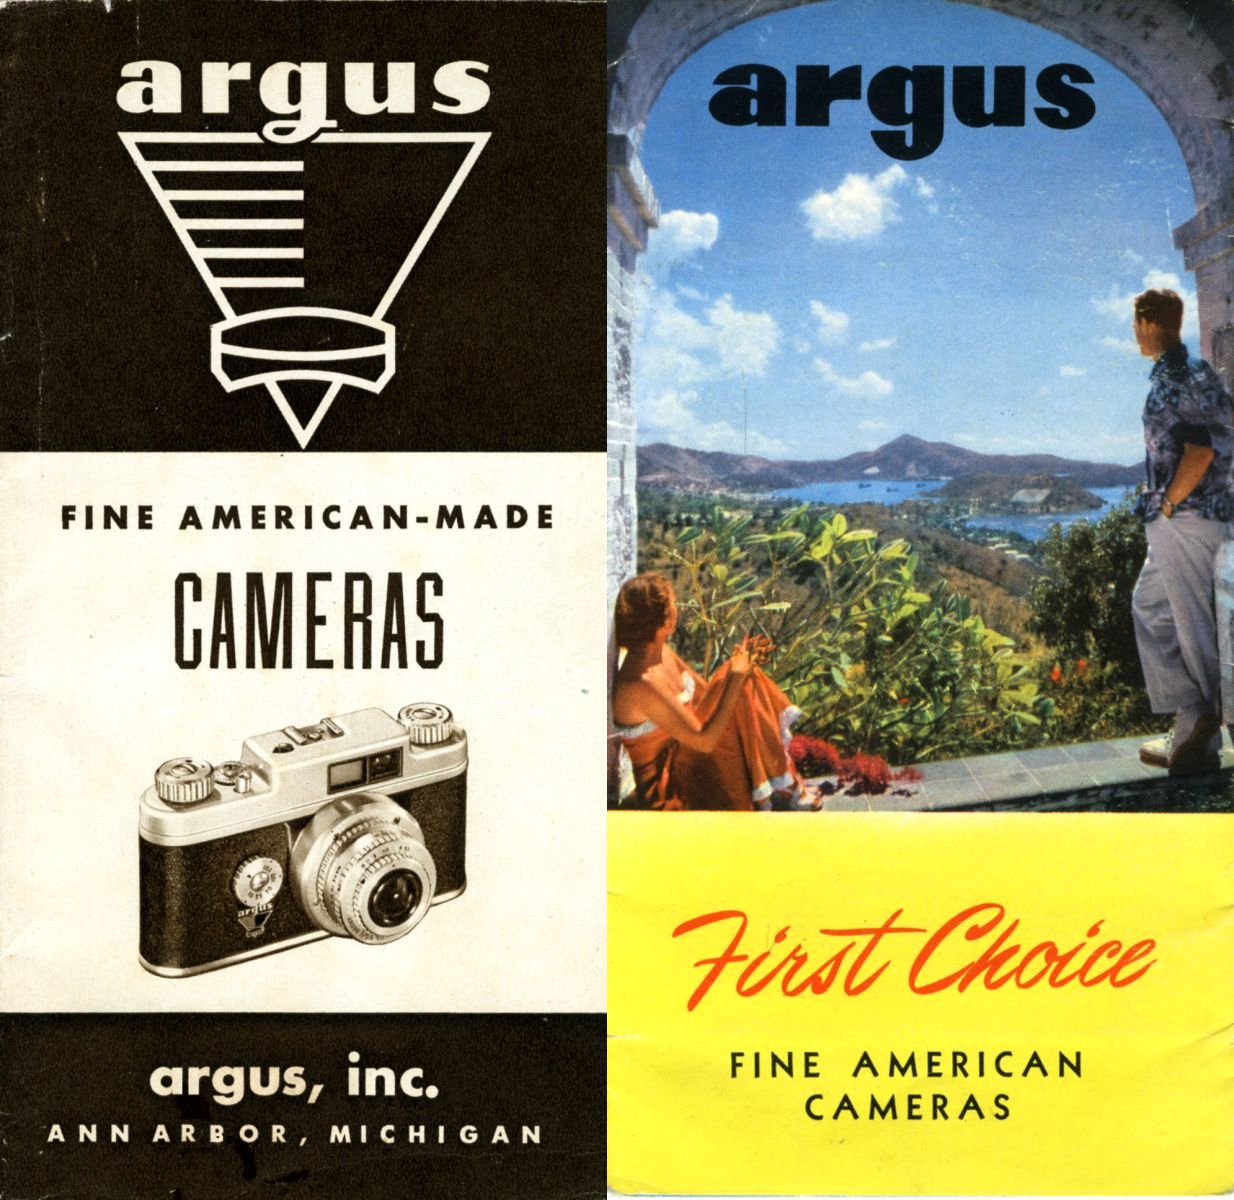 Fine American Cameras images used by Argus